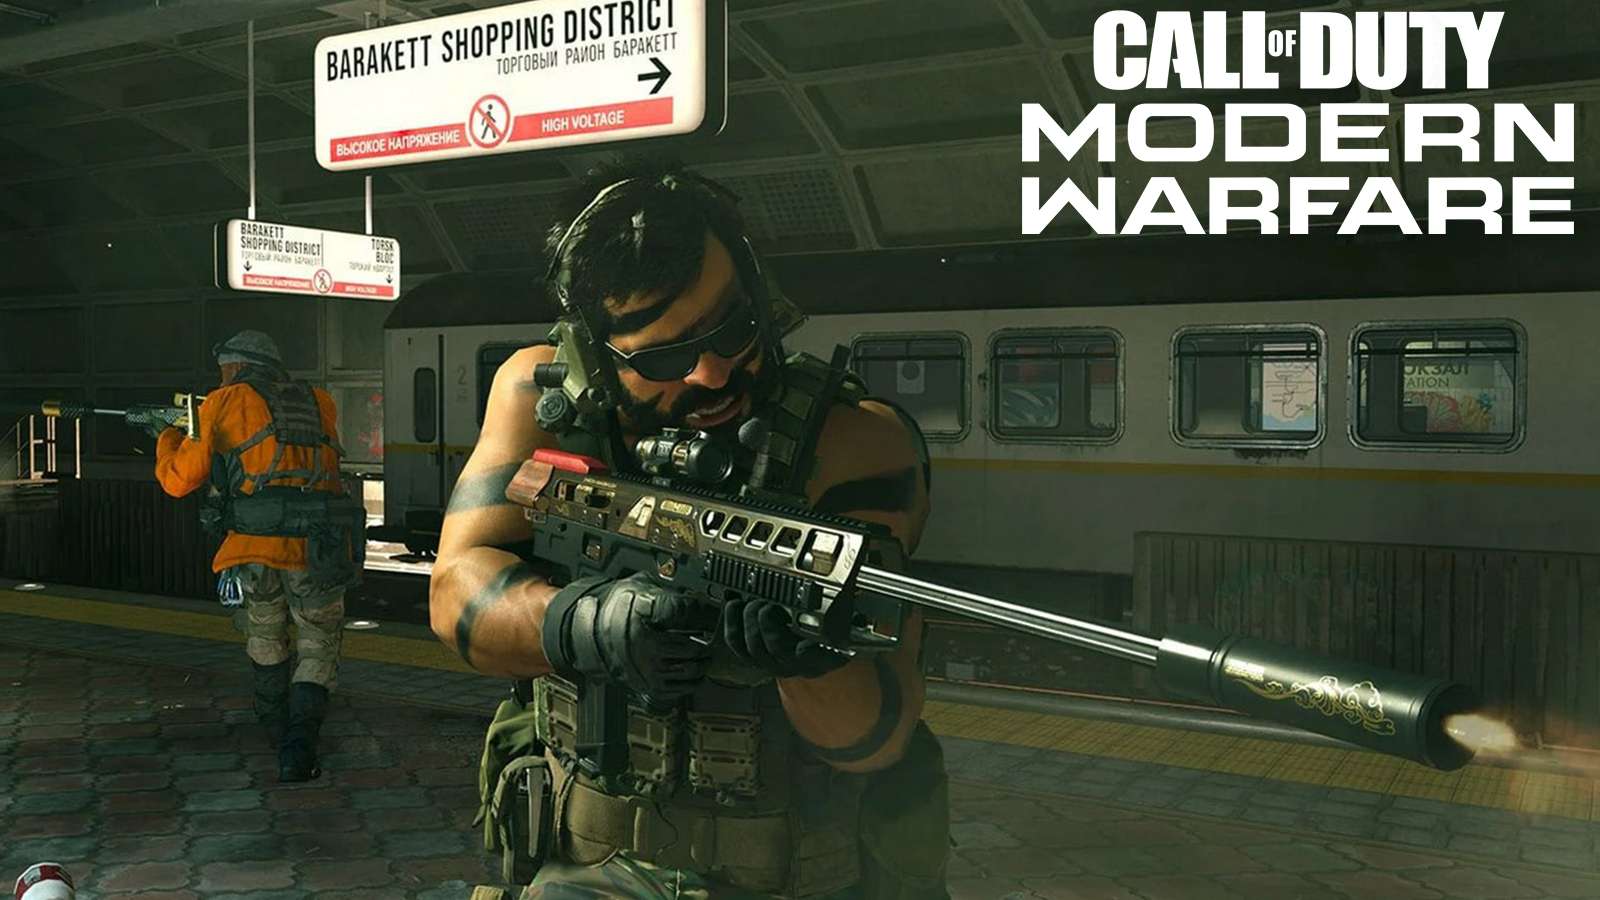 Warzone player using the SPR-208 sniper rifle.